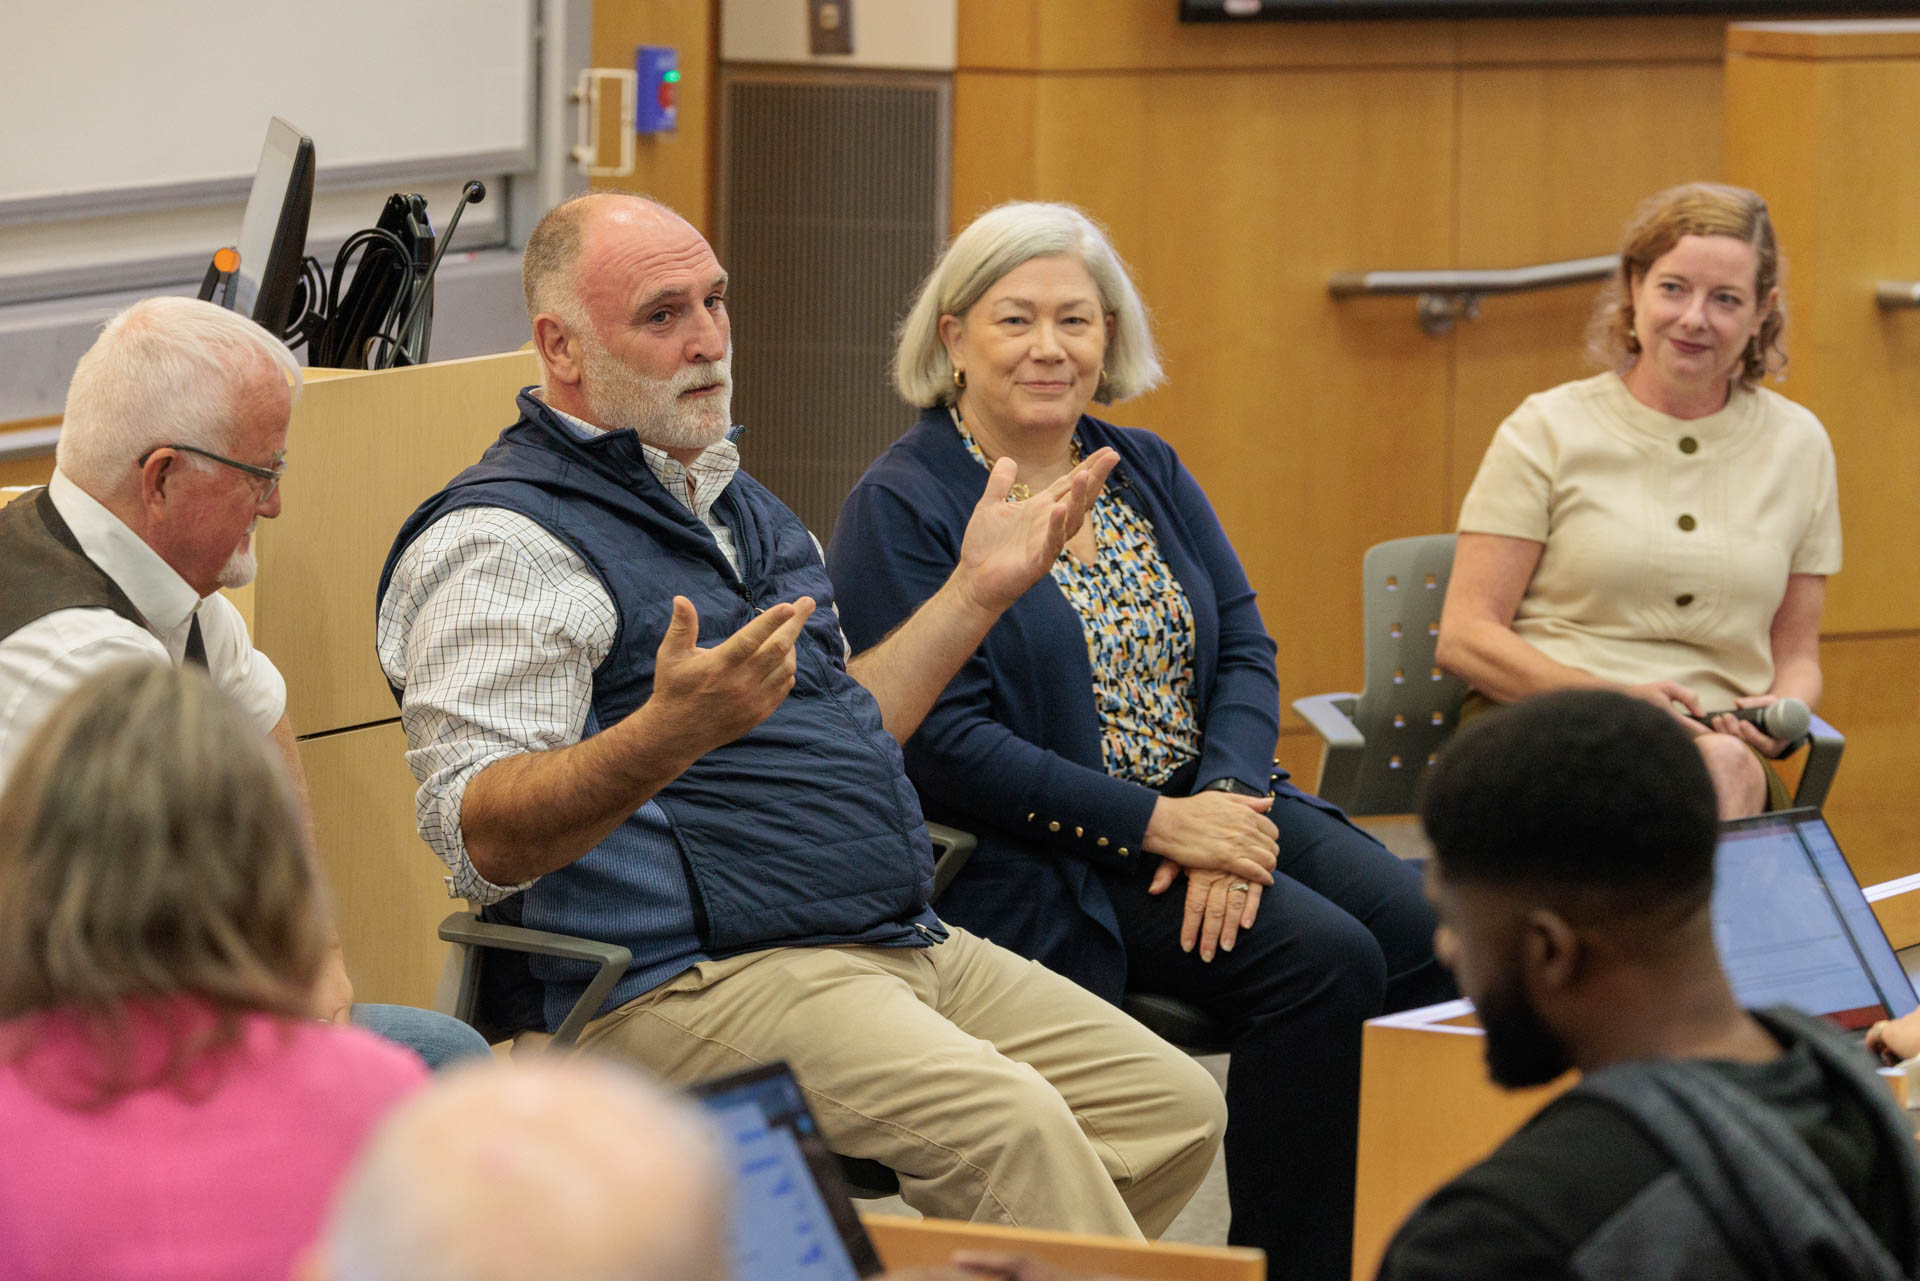 Jose Andres in a vest with hnads out speaking to a class with Robert Eggers on his right and President Granberg and Tara Scully on his right.